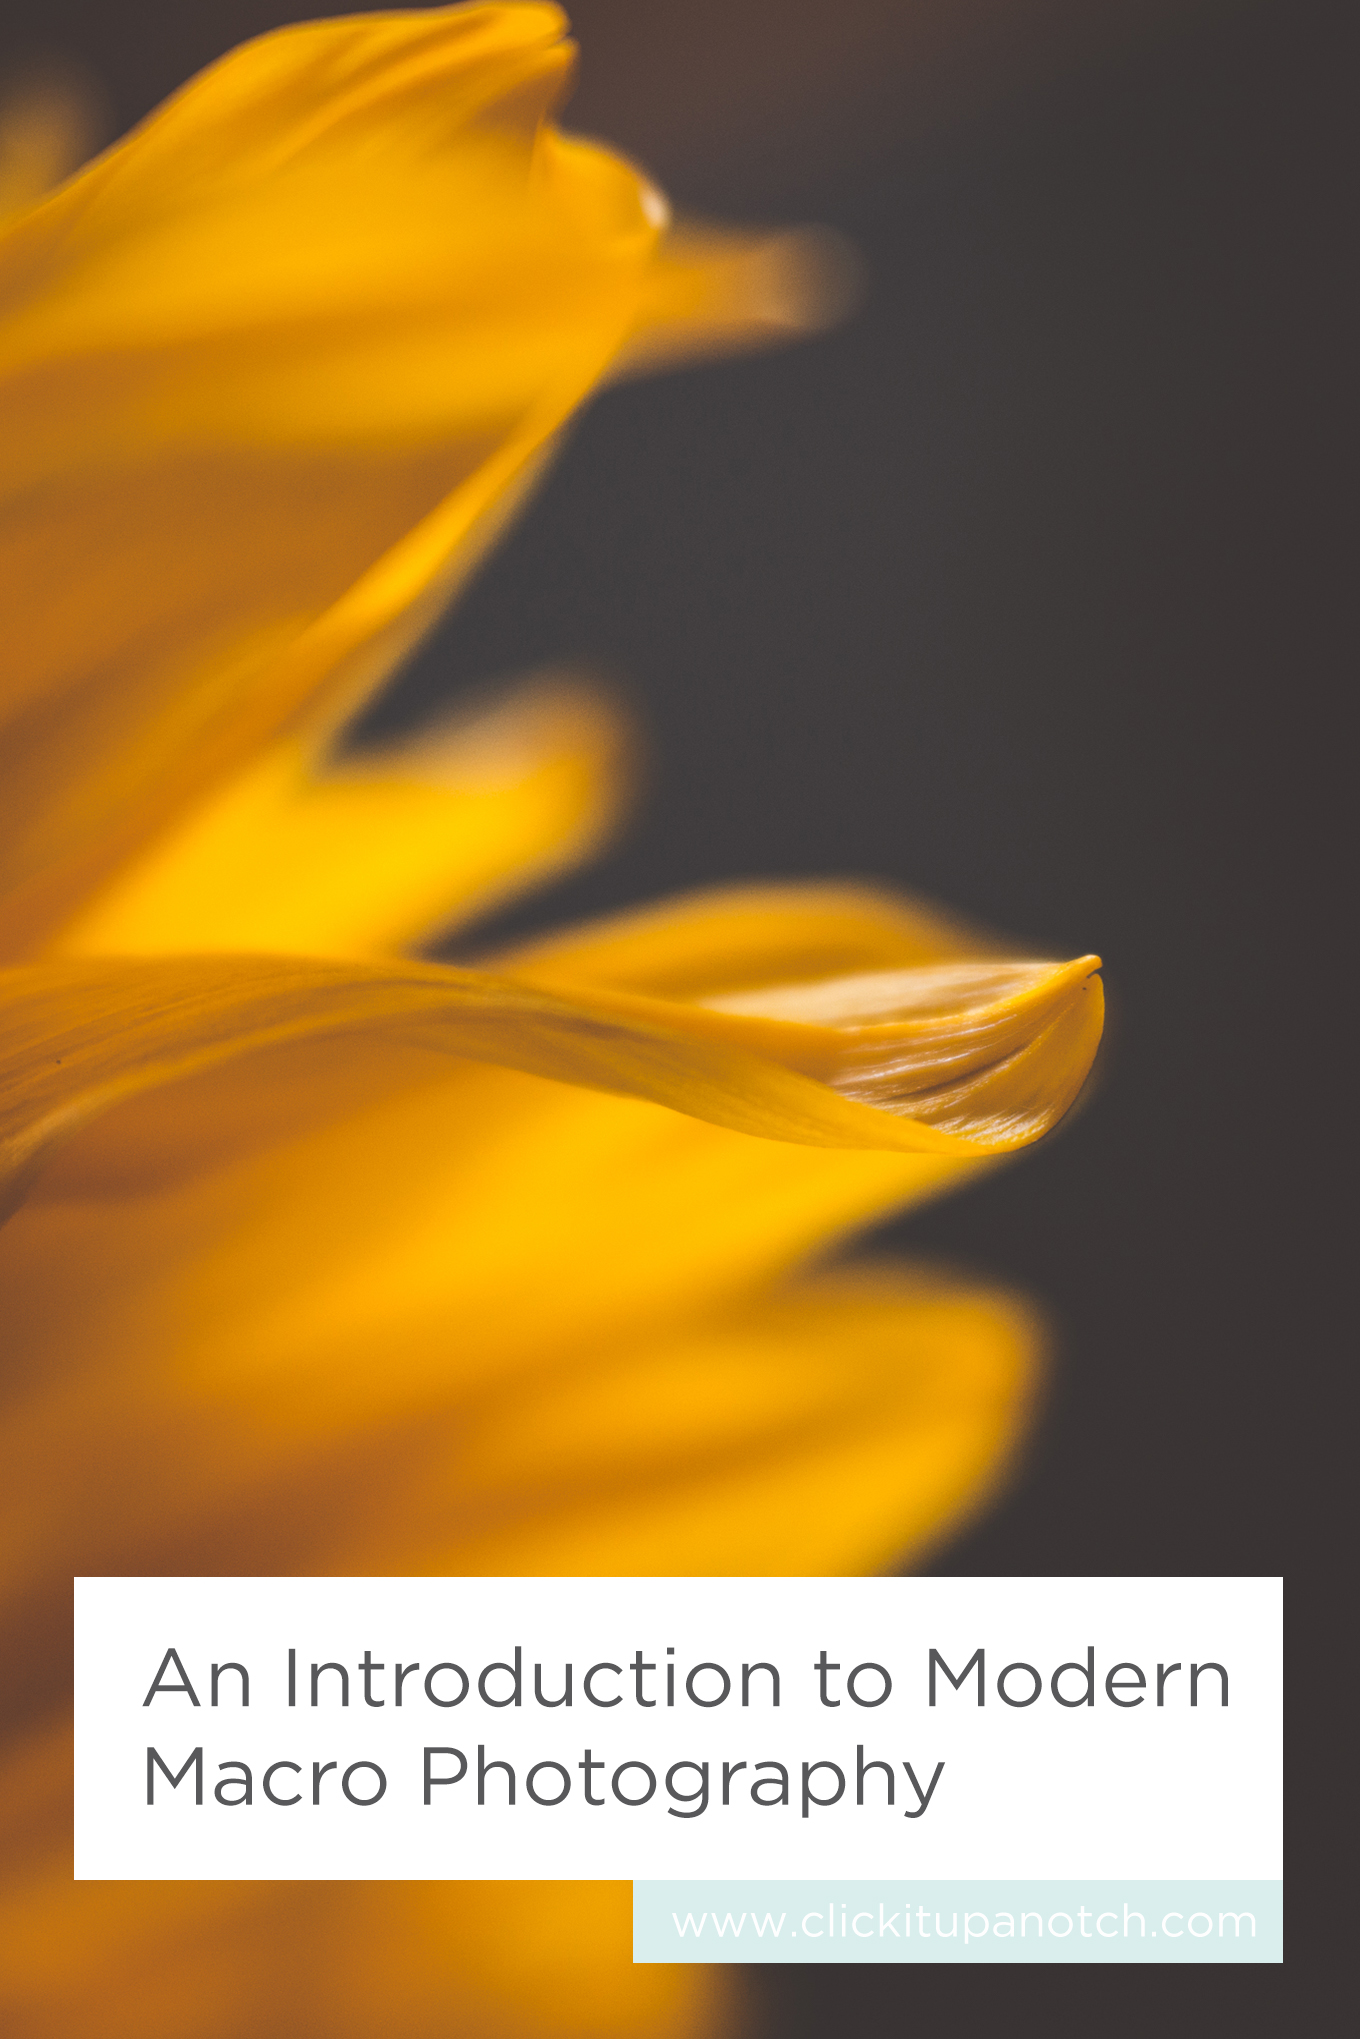 This is the best macro guide I've seen yet! Love all the tips! Read - "An Introduction to Modern Macro Photography"